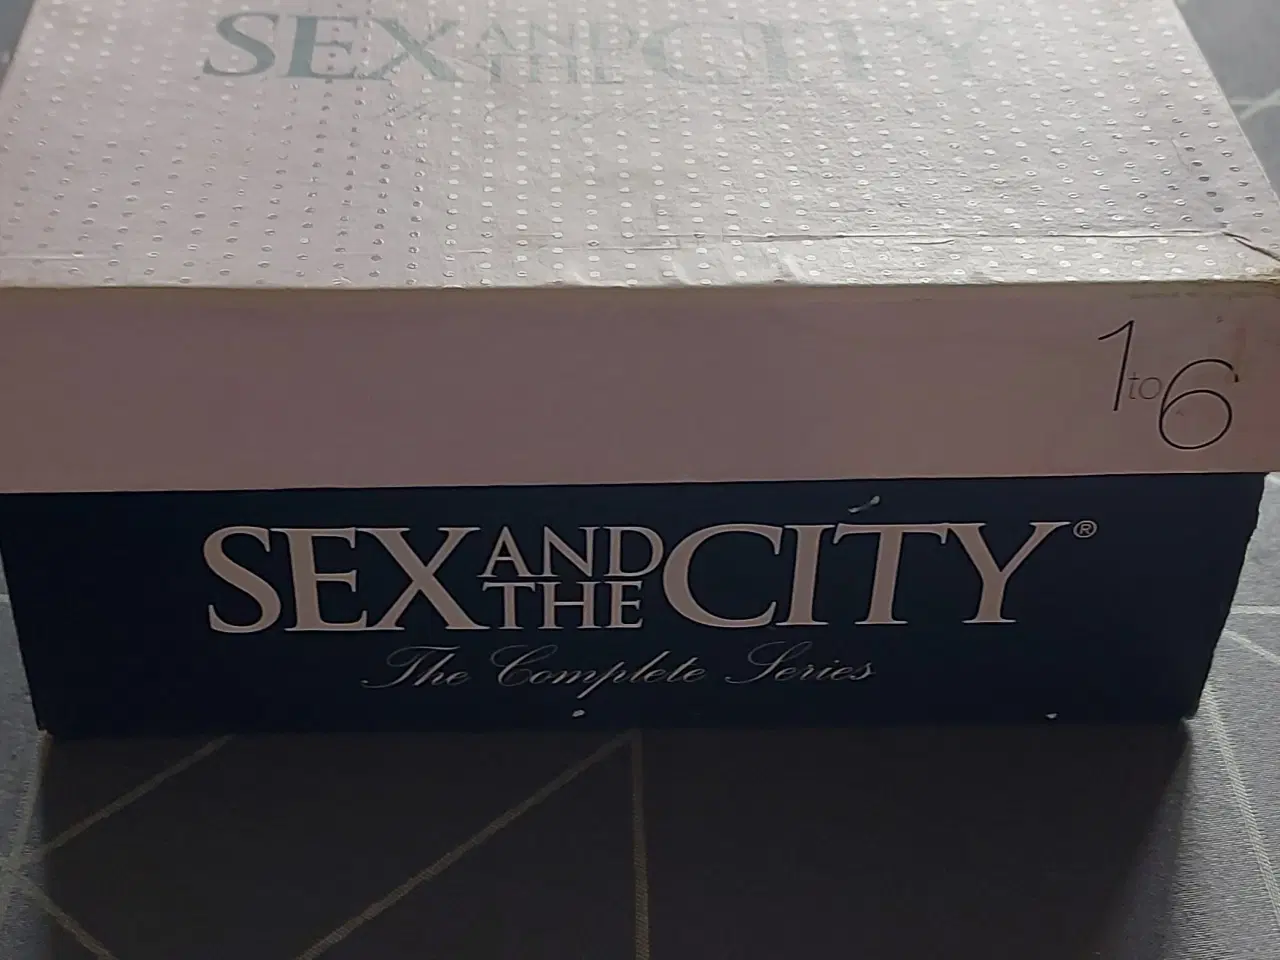 Billede 1 - Sex and the city box